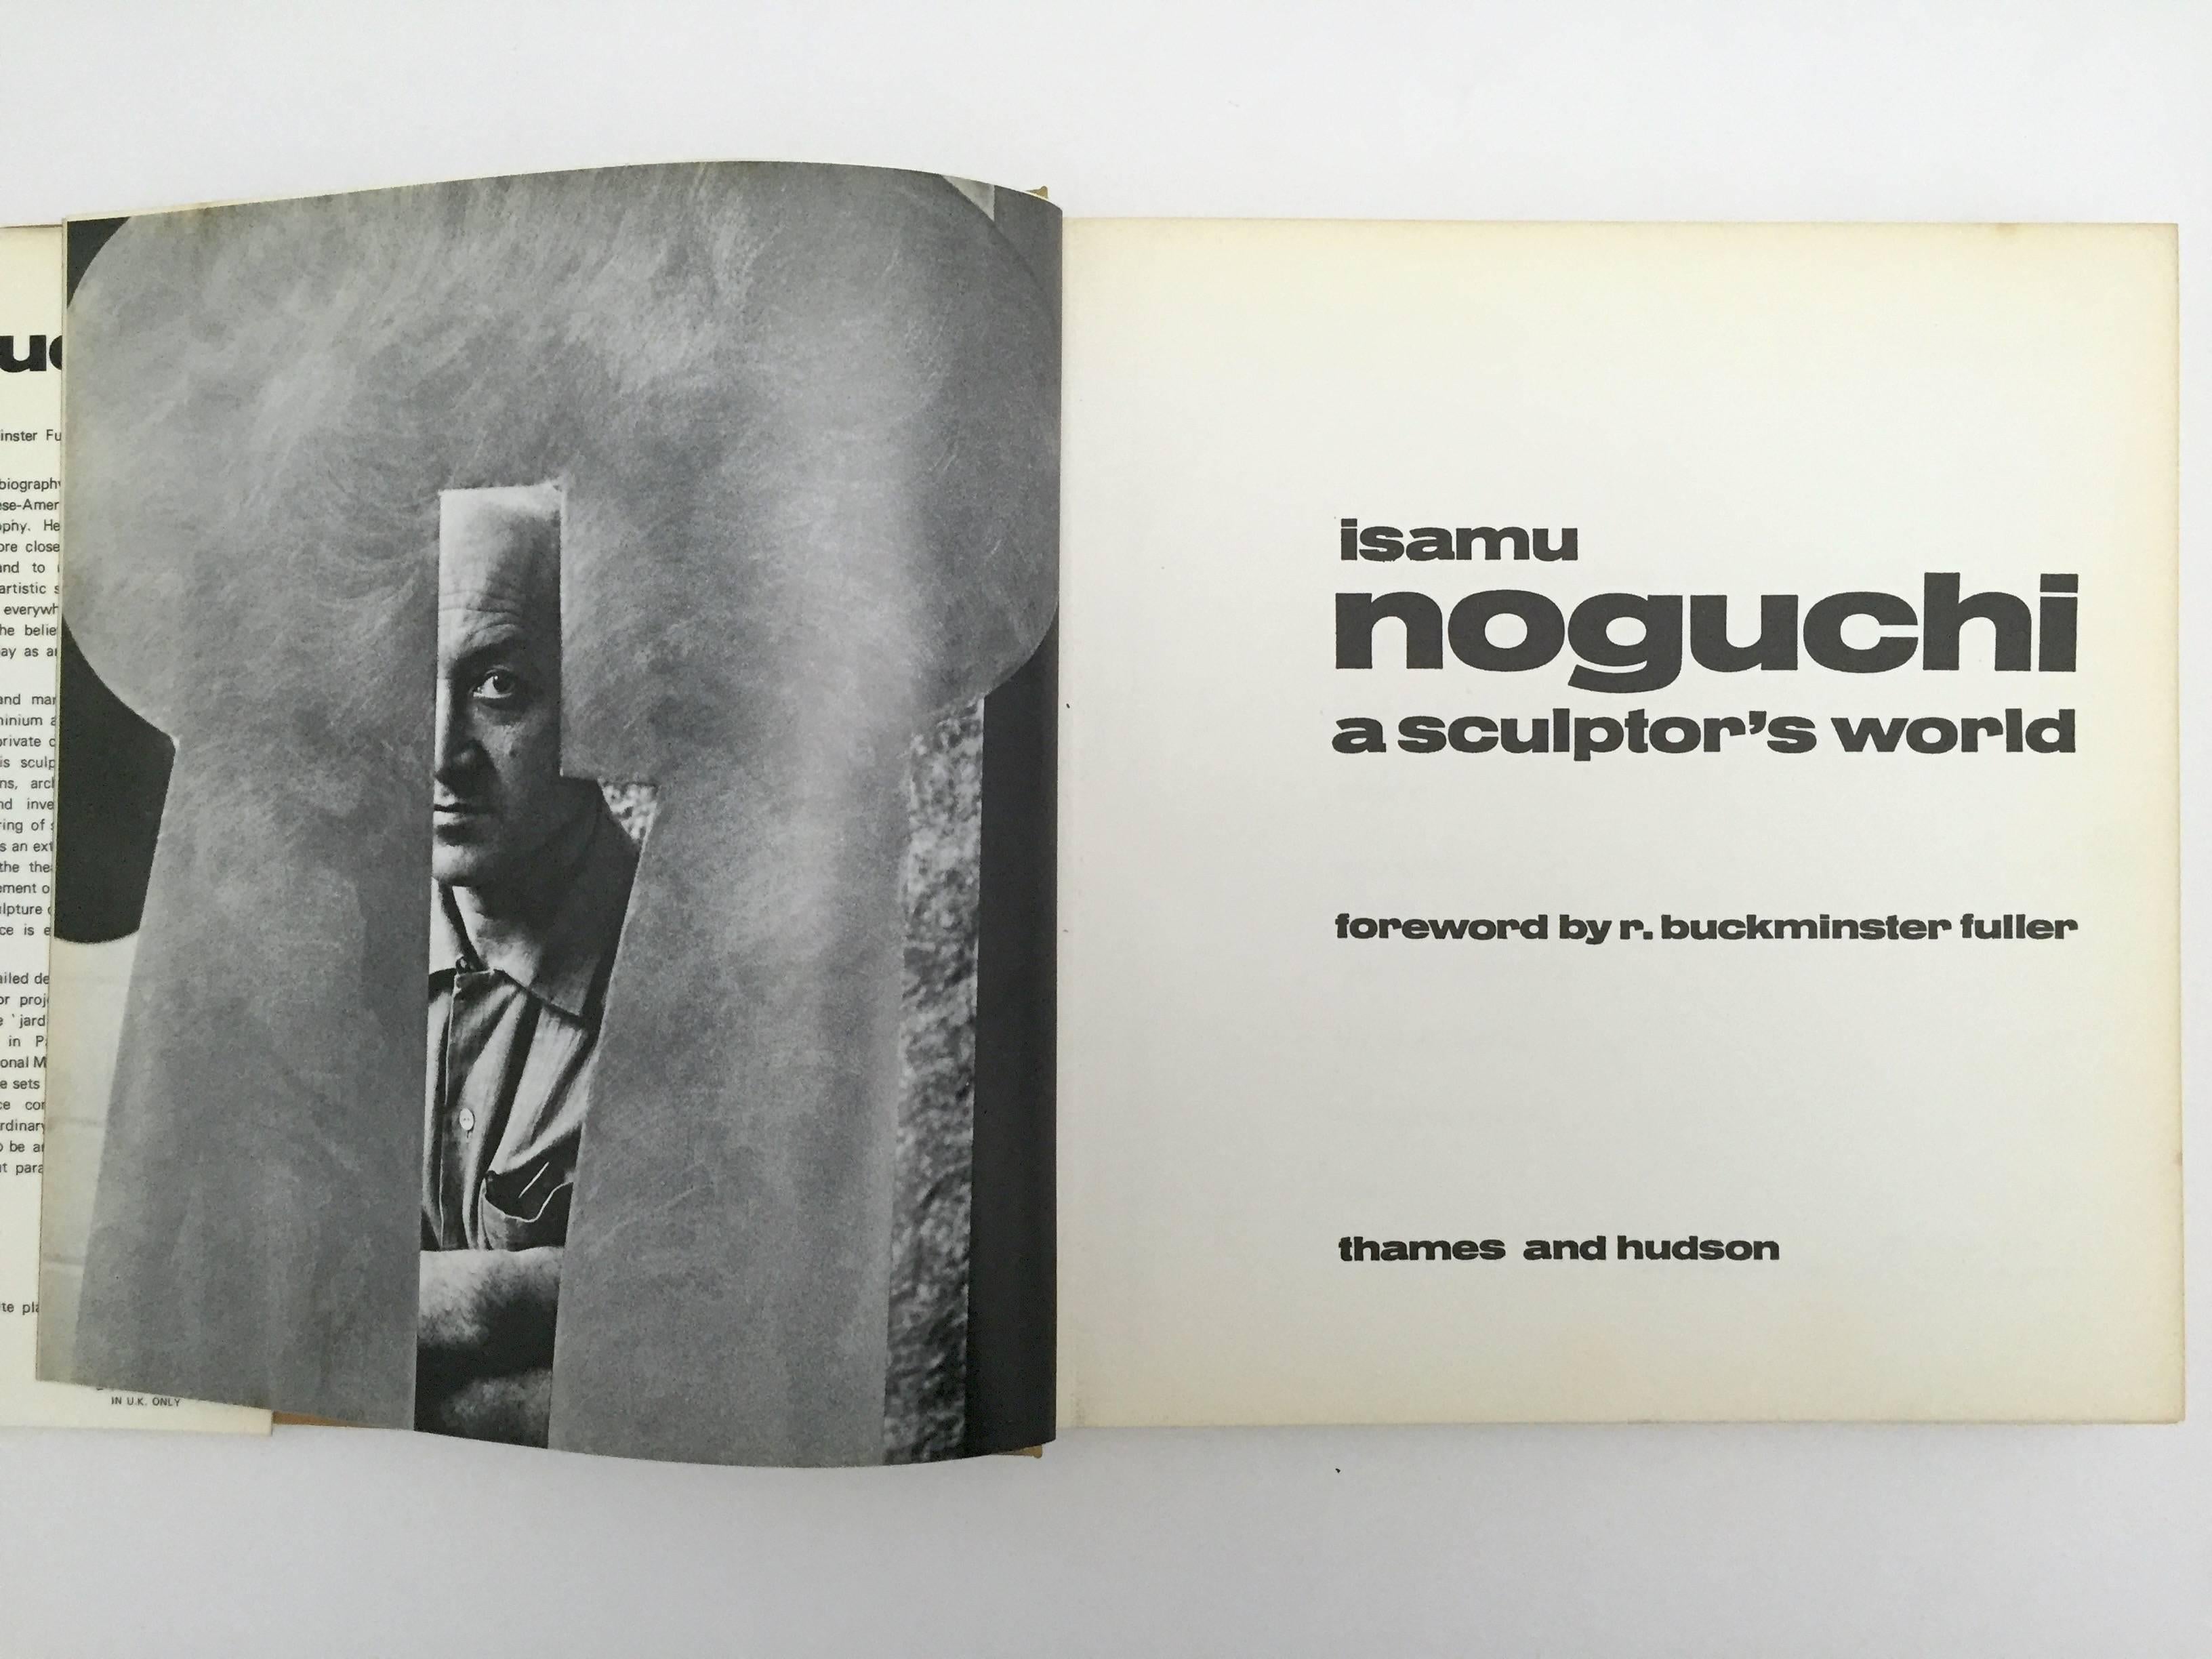 First edition.

Thames and Hudson, 1967.

The visual autobiography of American sculptor and set designer Isamo Noguchi, this very wonderful, large book is an analysis by the artist of his life and work. Illustrated in black and white and color,